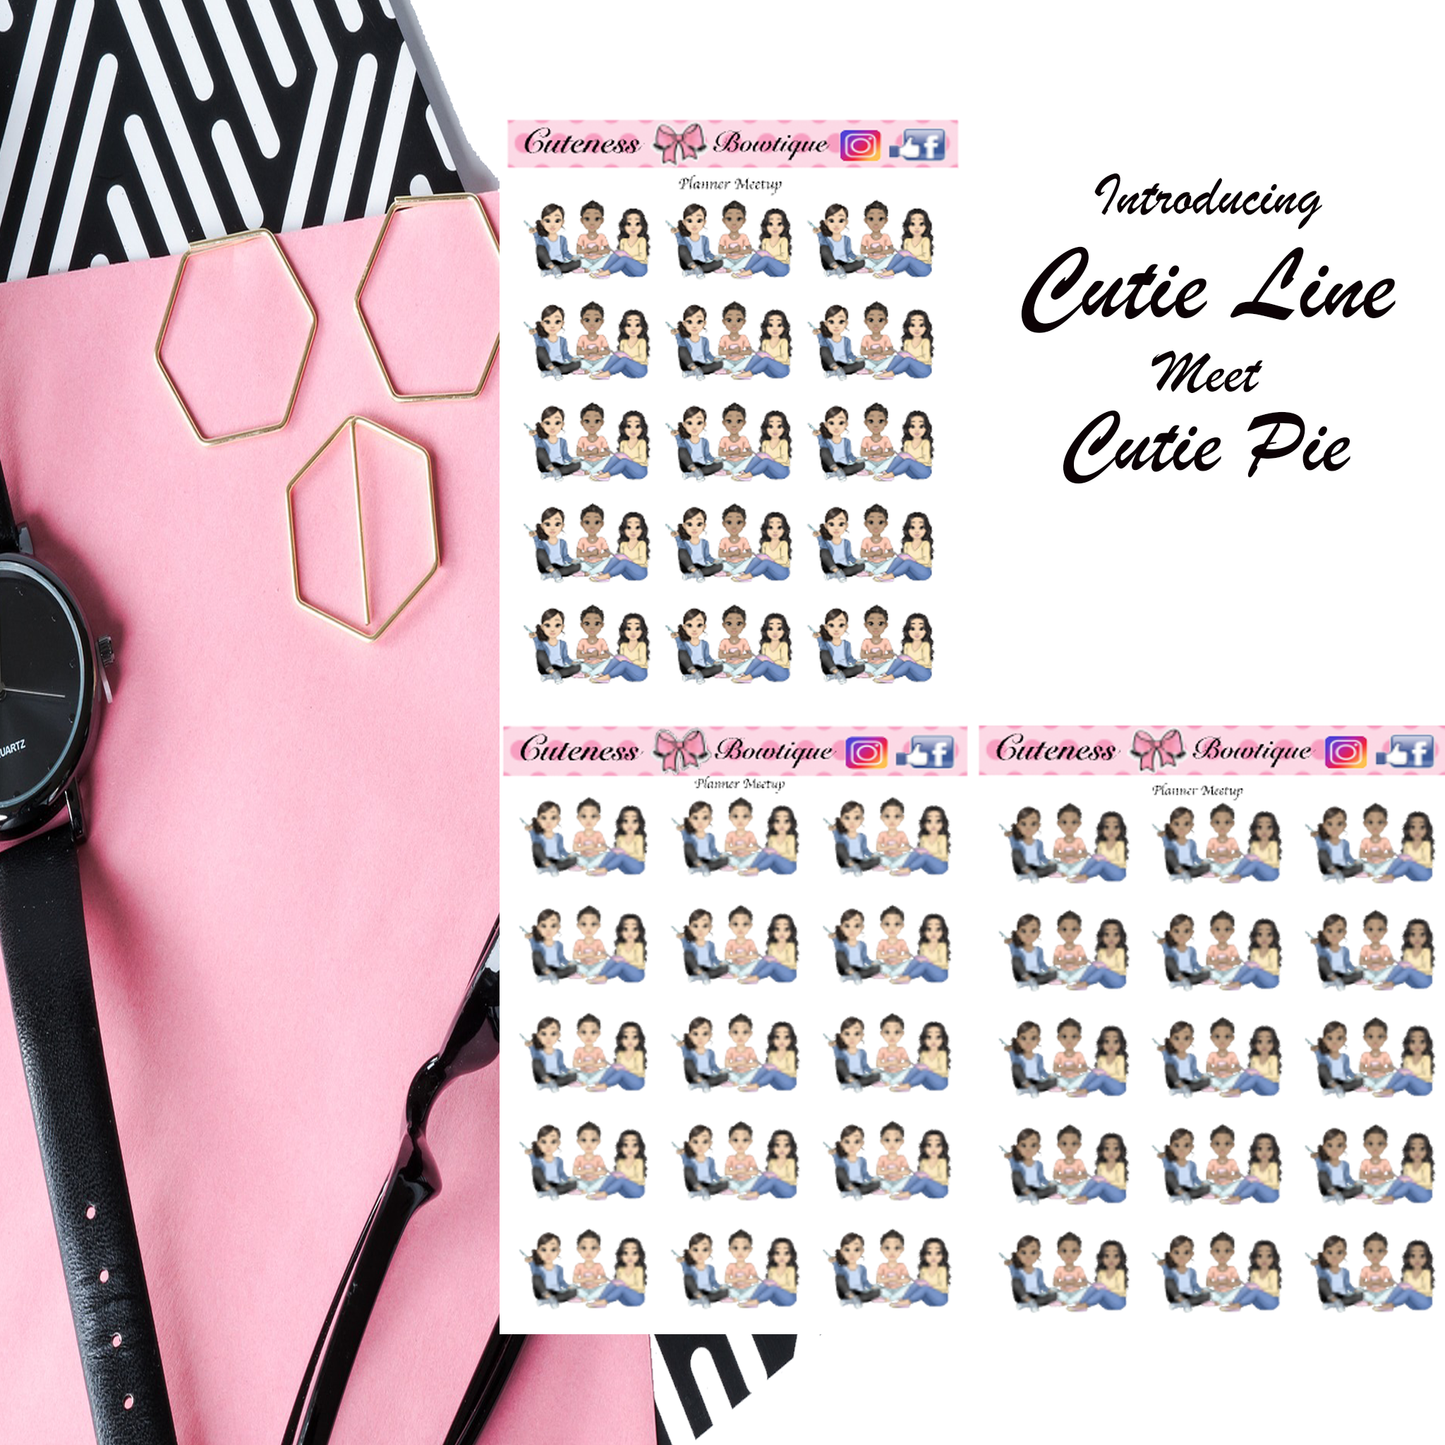 The Cutie Line Icon Sticker Sheet | Cuteness Planner Stickers for Agendas, Planners, Notebooks, Dividers | PLANNER MEETUPS